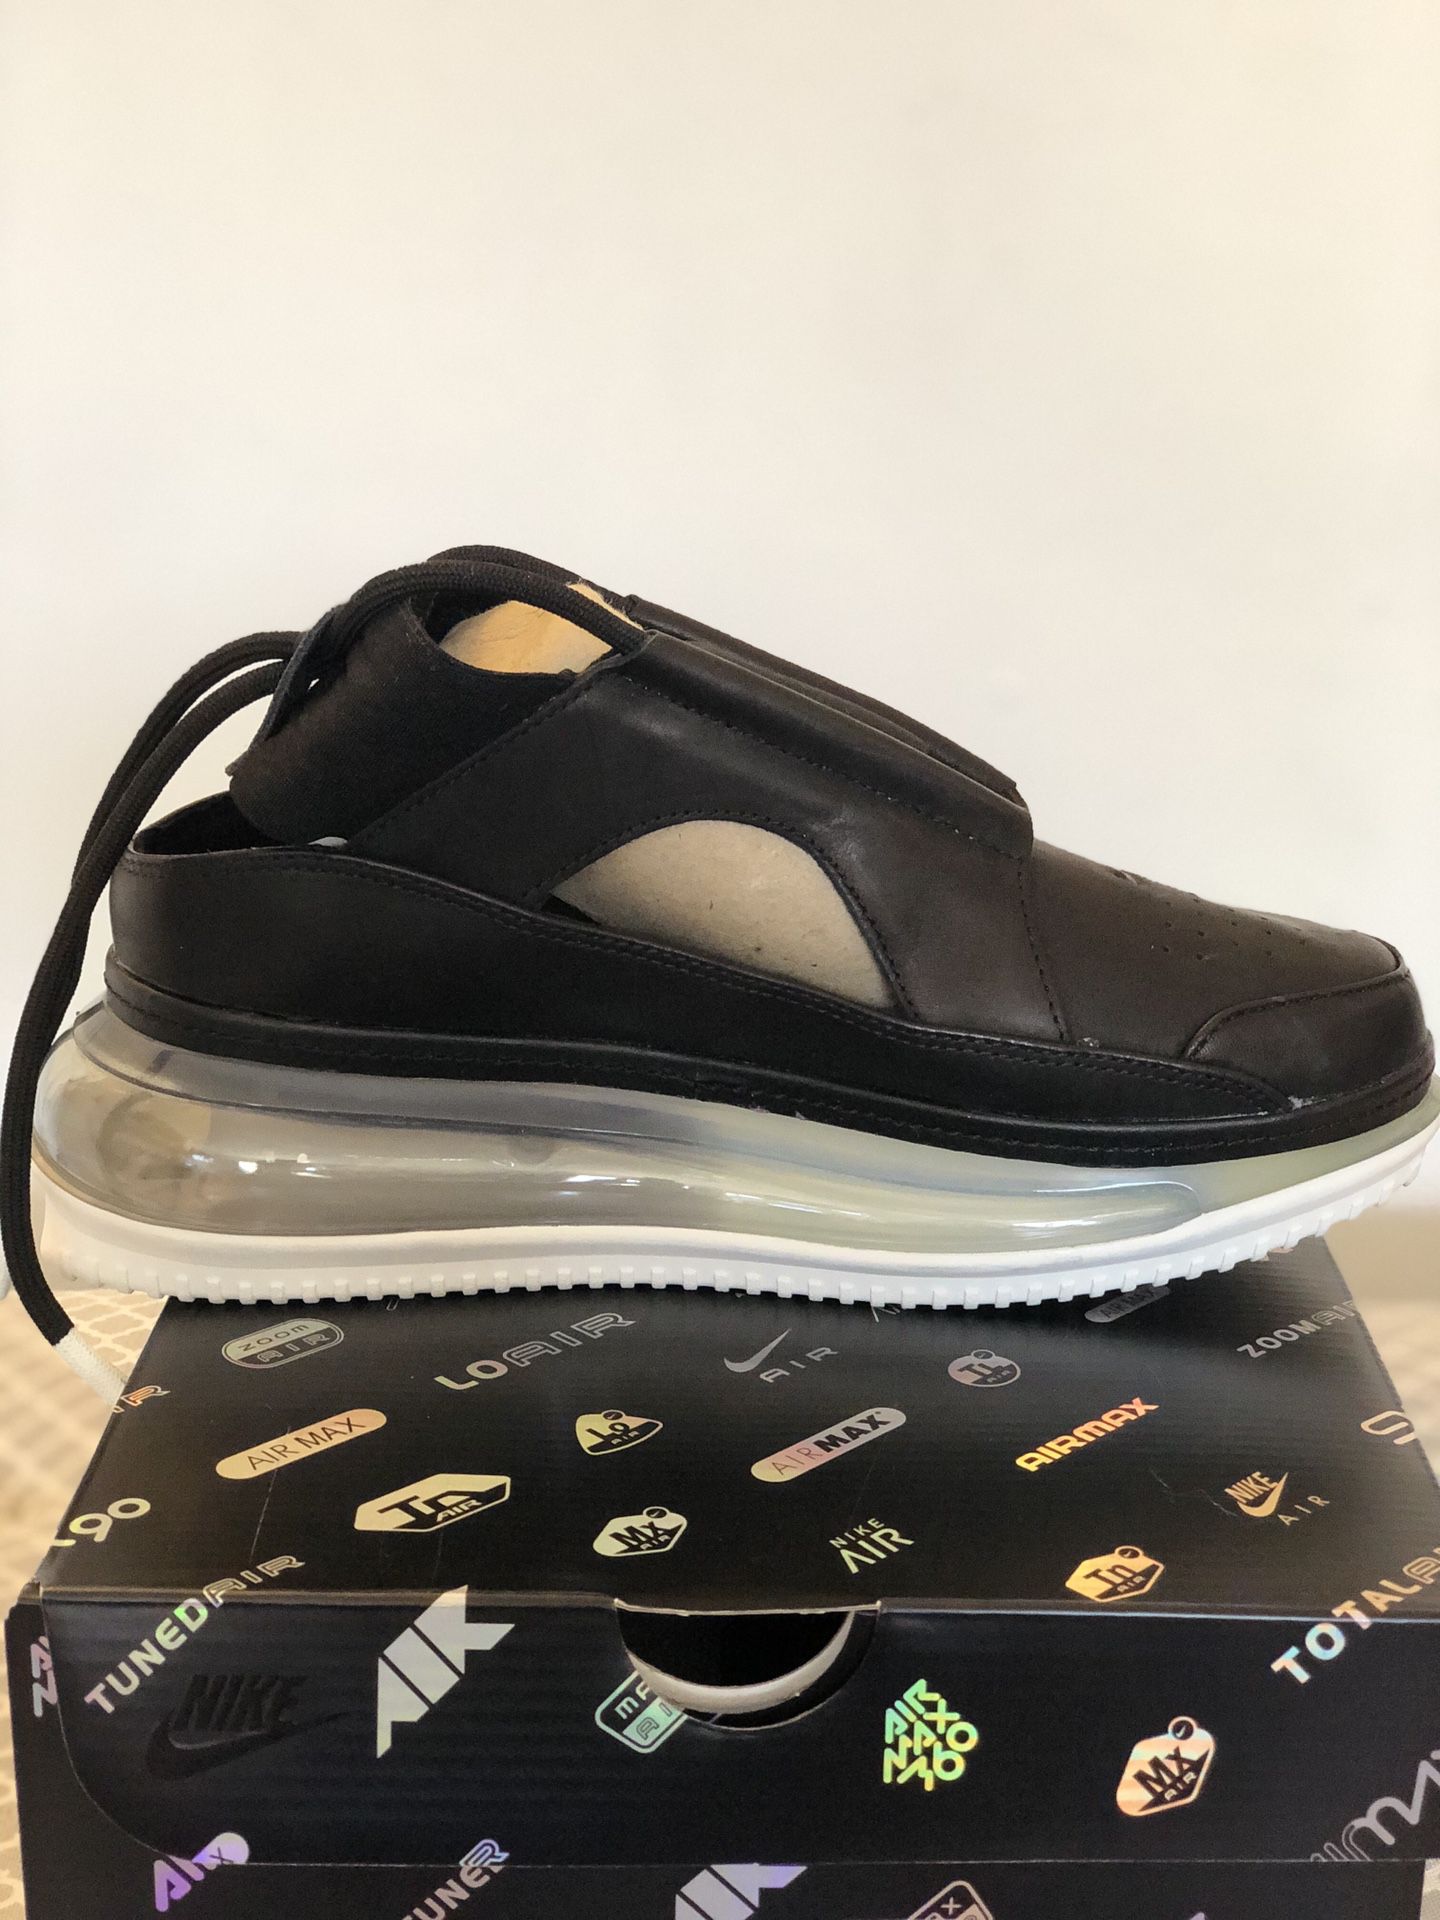 Air Max FF 720 Black White Shoes Sandals AO3891-001 Womens for Sale in Los Angeles, CA - OfferUp